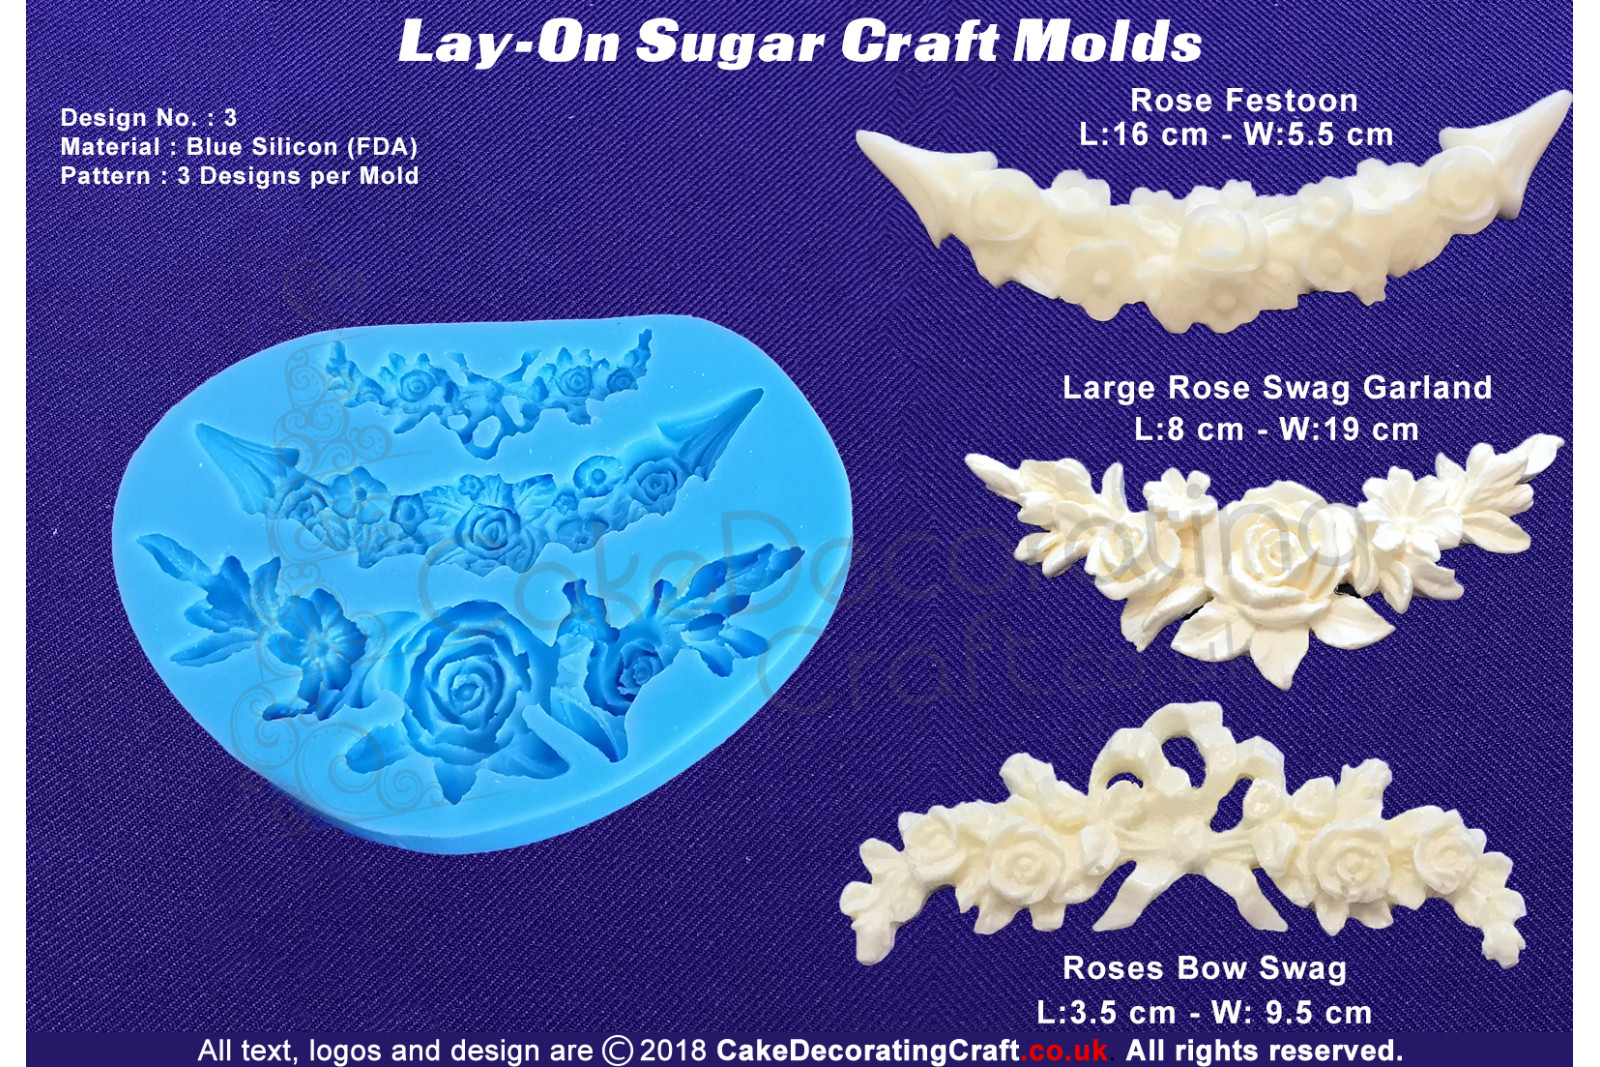 Design 3 | Lay-On Silicone Cake Molds | Deep Floral Roses | Wedding Cakes | Design | Sugar Cake Decorating Craft 